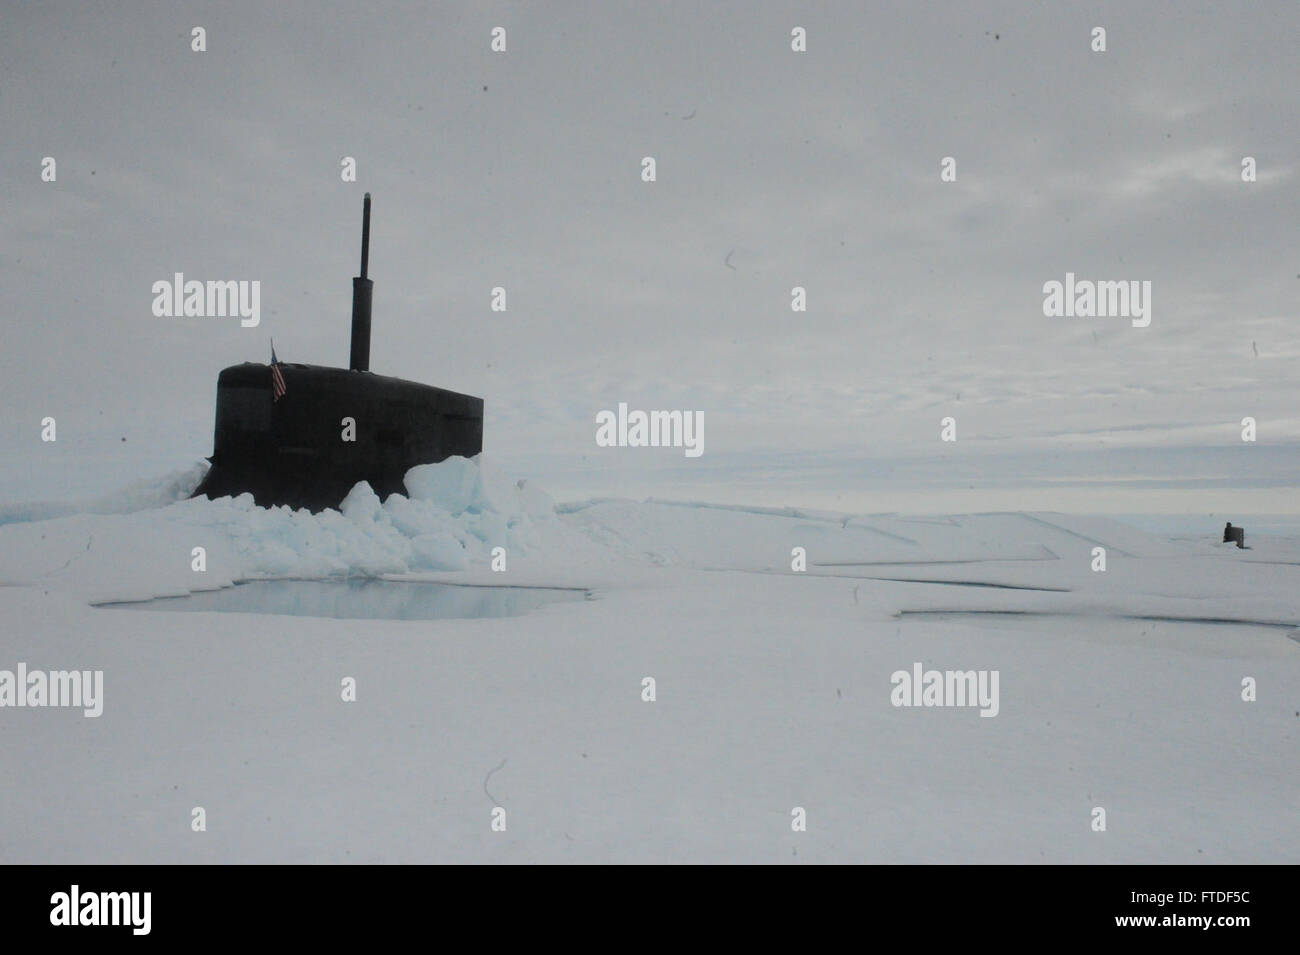 150730-N-ZZ999-004 NORTH POLE (July 30, 2015) The fast attack submarine USS Seawolf (SSN 21) is submerged after surfacing through the arctic ice July 30, 2015. Seawolf, homeported in Bangor, Washington, is conducting naval operations in the U.S. 6th Fleet area of operations in support of U.S. national security interests in Europe. (U.S. Navy photo/Released Stock Photo